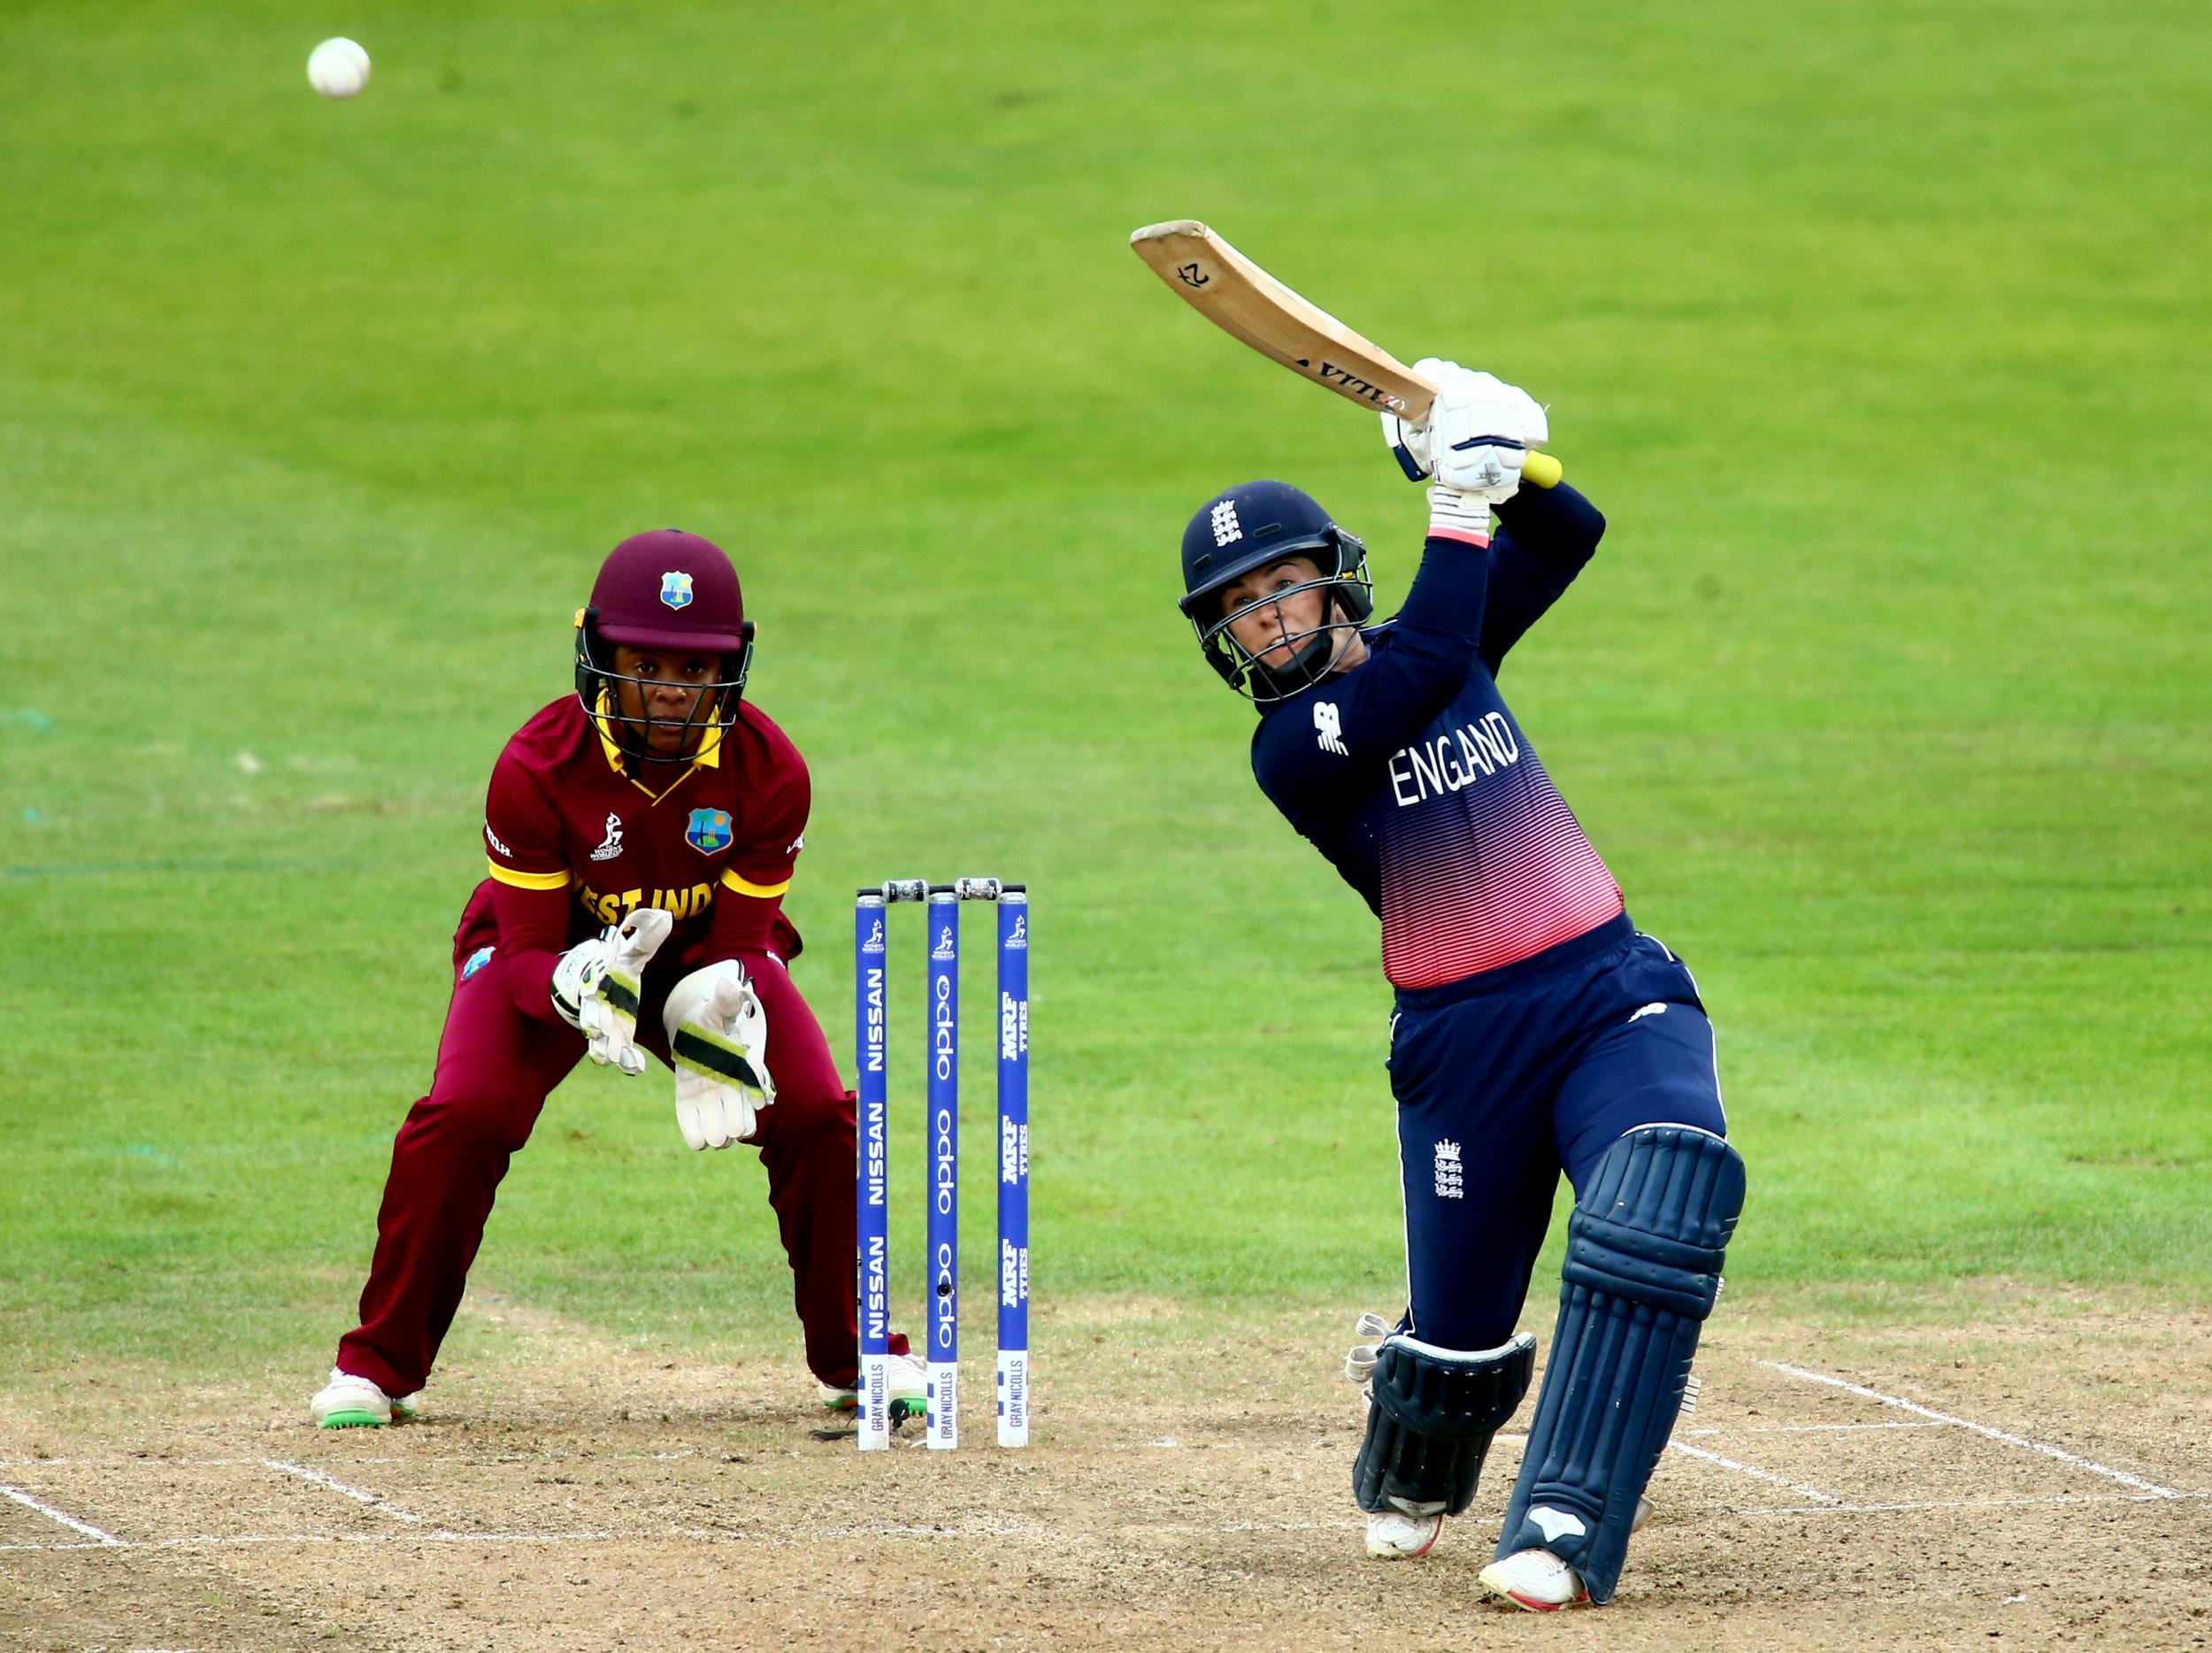 Beaumont in action against the West Indies